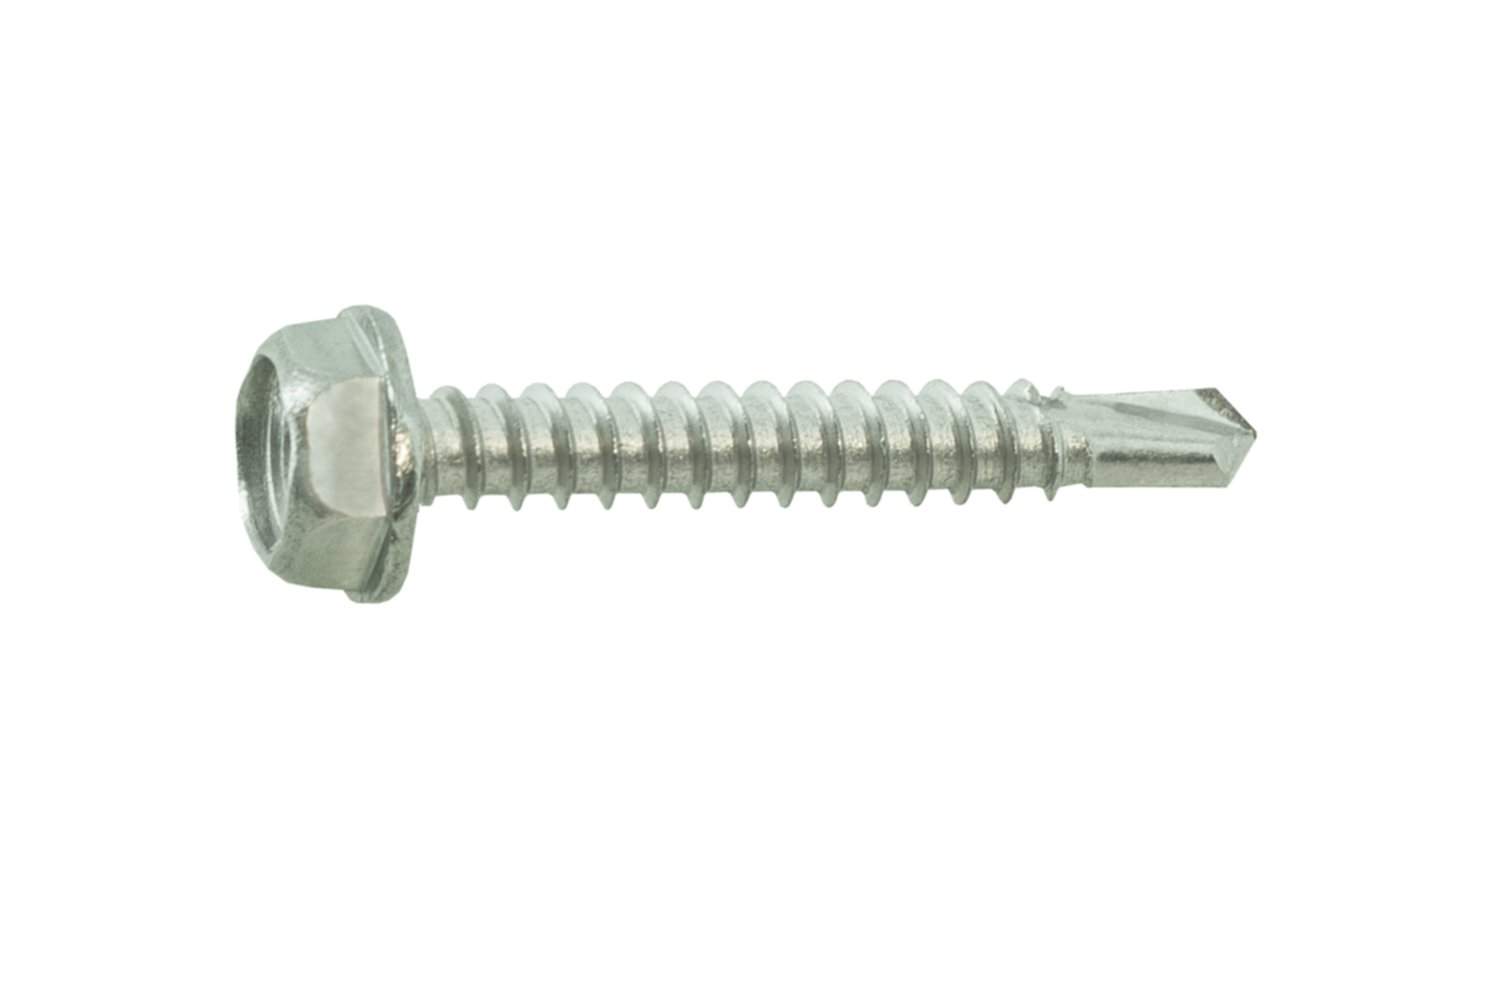 Self-drilling sheet metal screws with hexagonal head, stainless steel A4 6.3x38, 6 pcs.